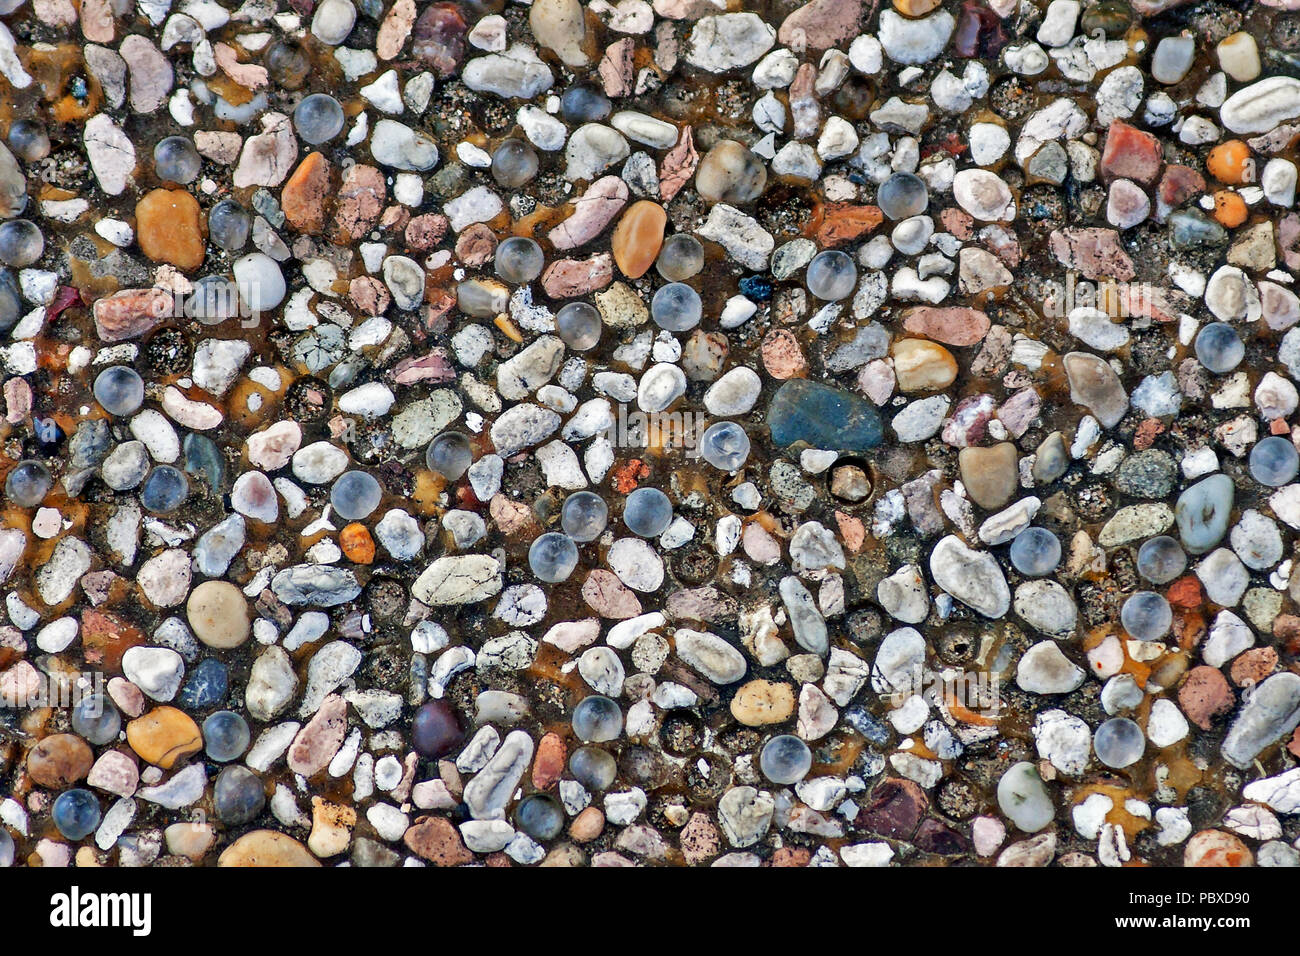 A myriad of small stones and pebbles of different shapes and colours crammed together into a concrete base to form pebble dashing. Stock Photo